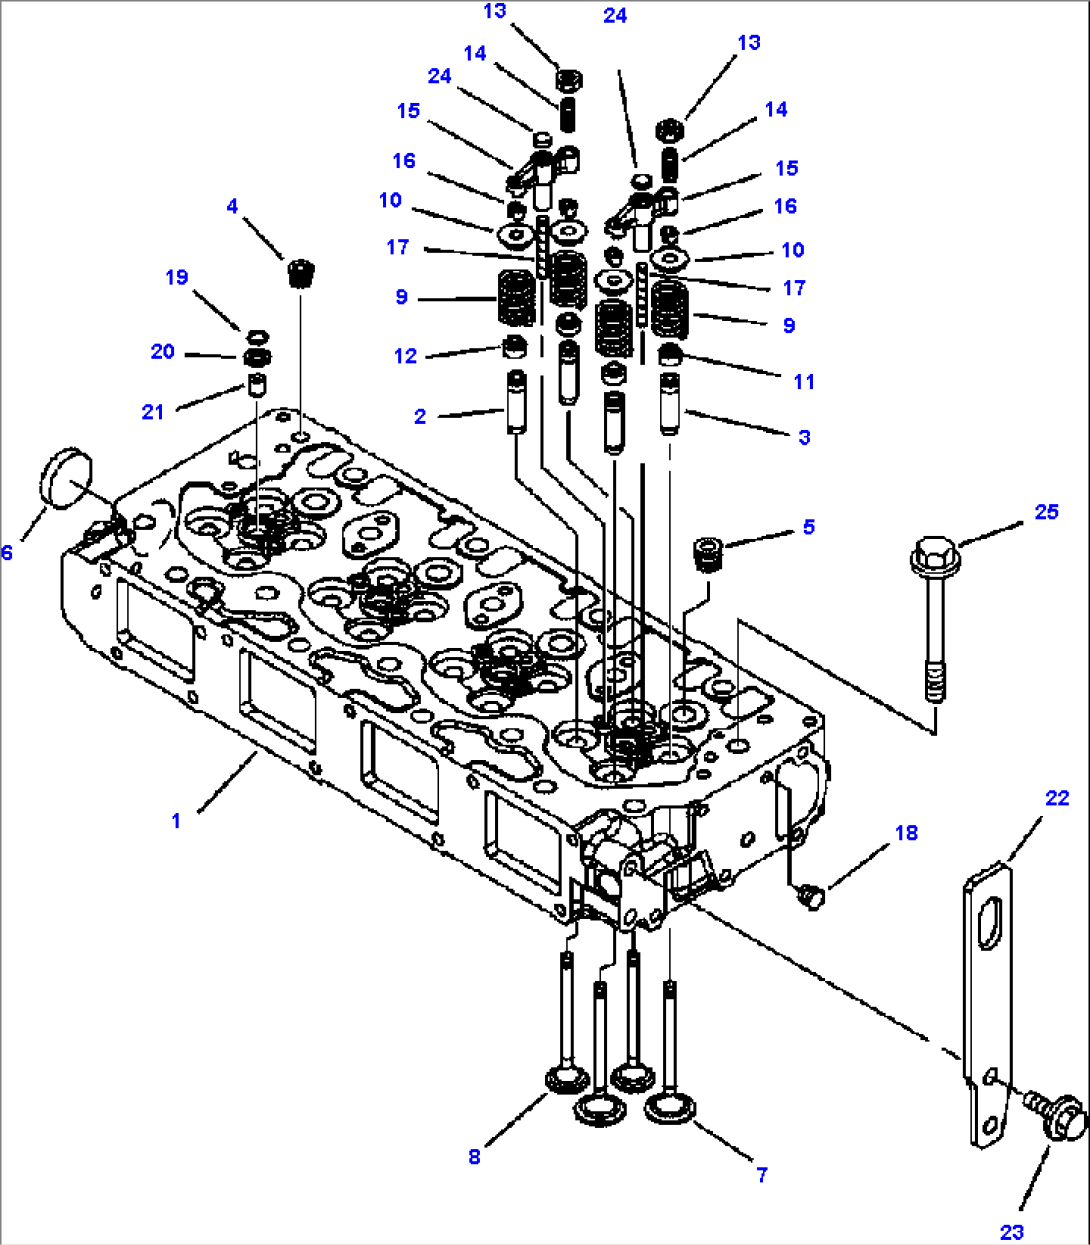 FIG. A0103-01A1 TIER II ENGINE - CYLINDER HEAD AND VALVE TRAIN